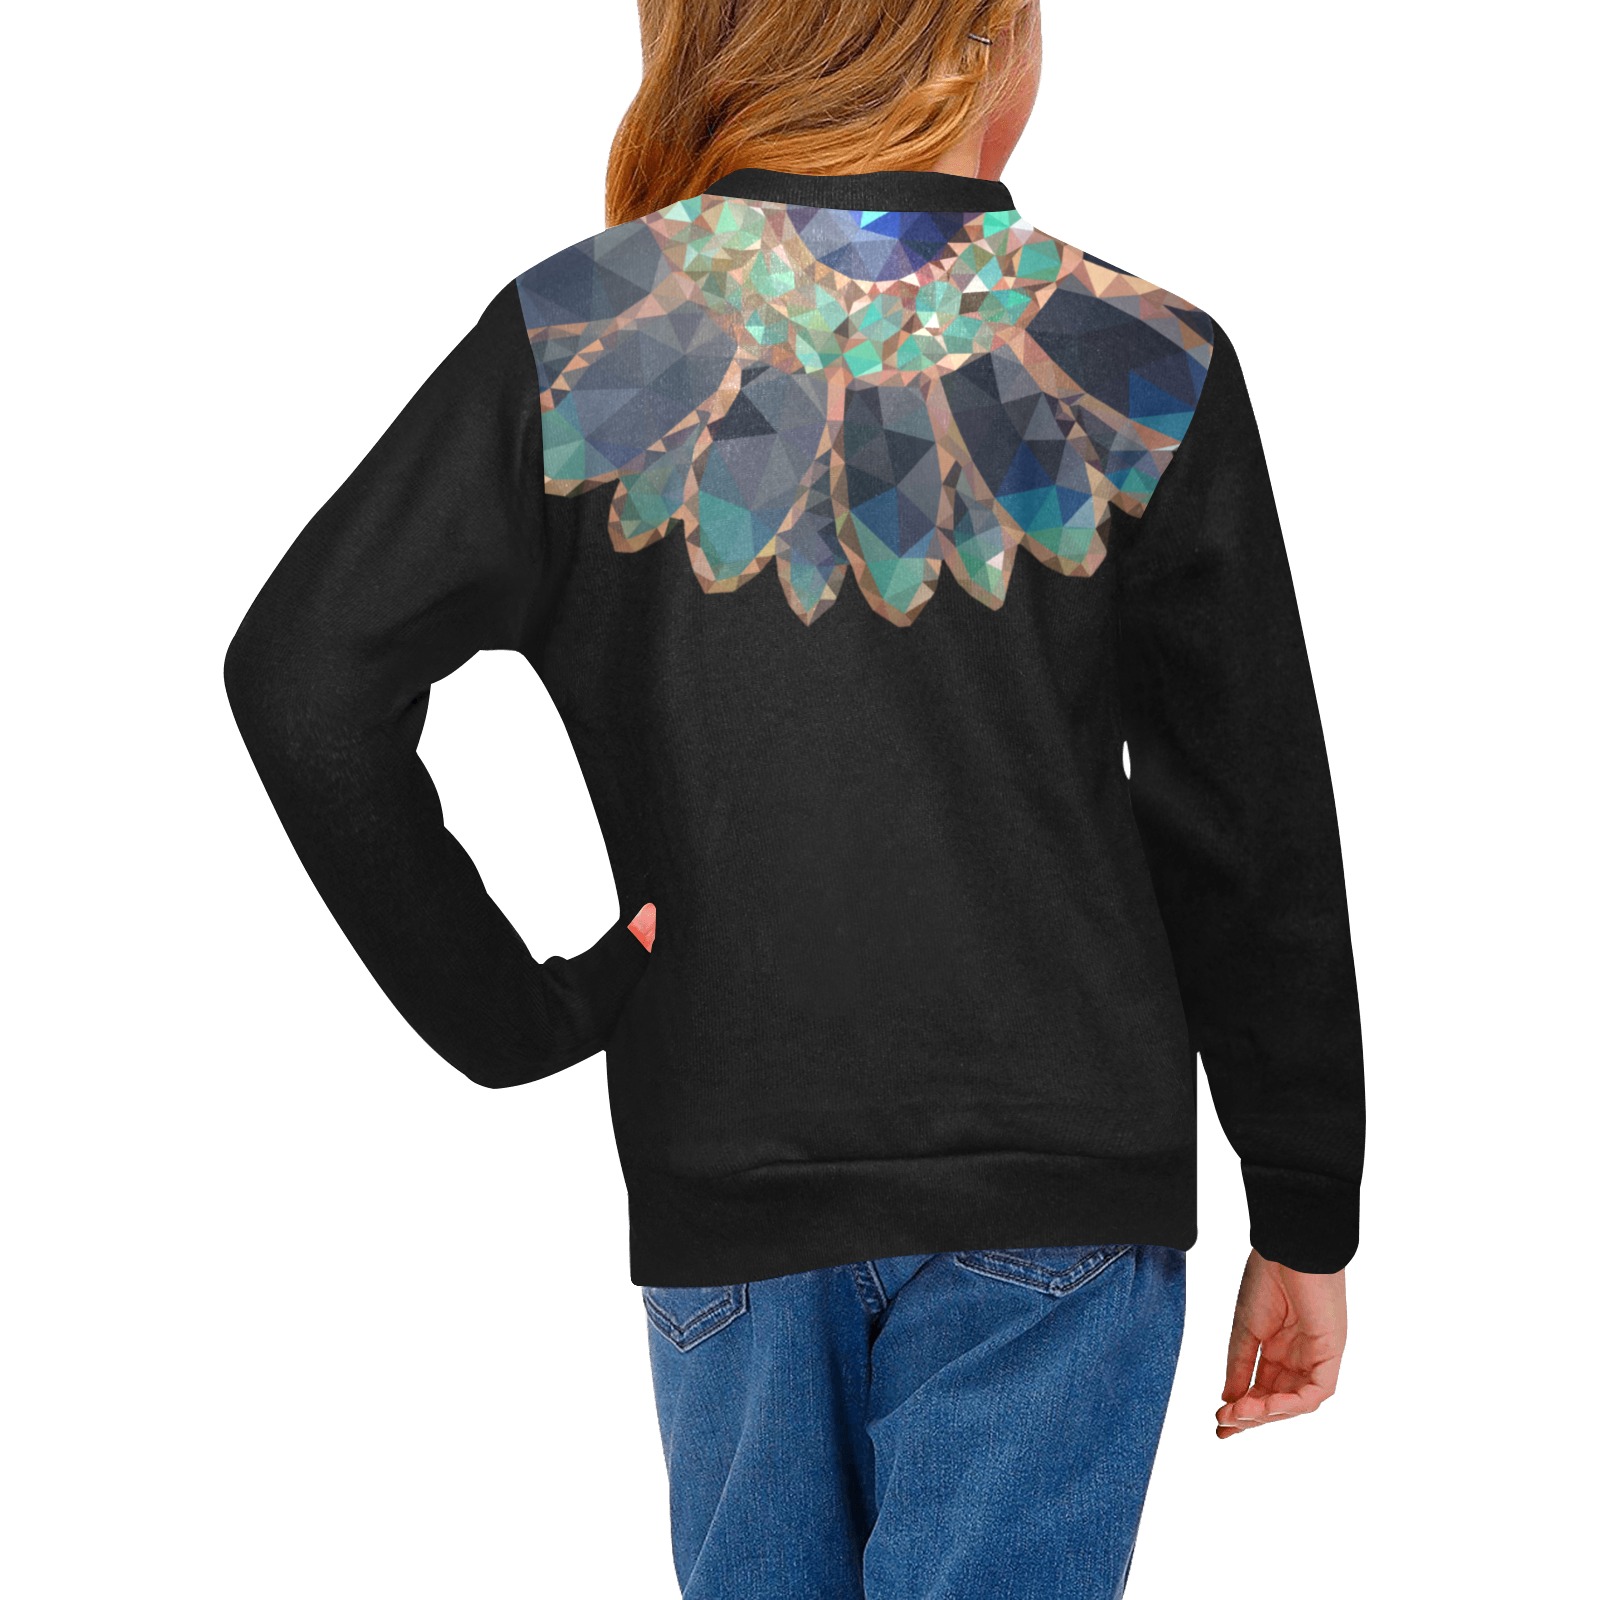 Mosaik Flower Blue and Green Abstract Floral Girls' All Over Print Crew Neck Sweater (Model H49)